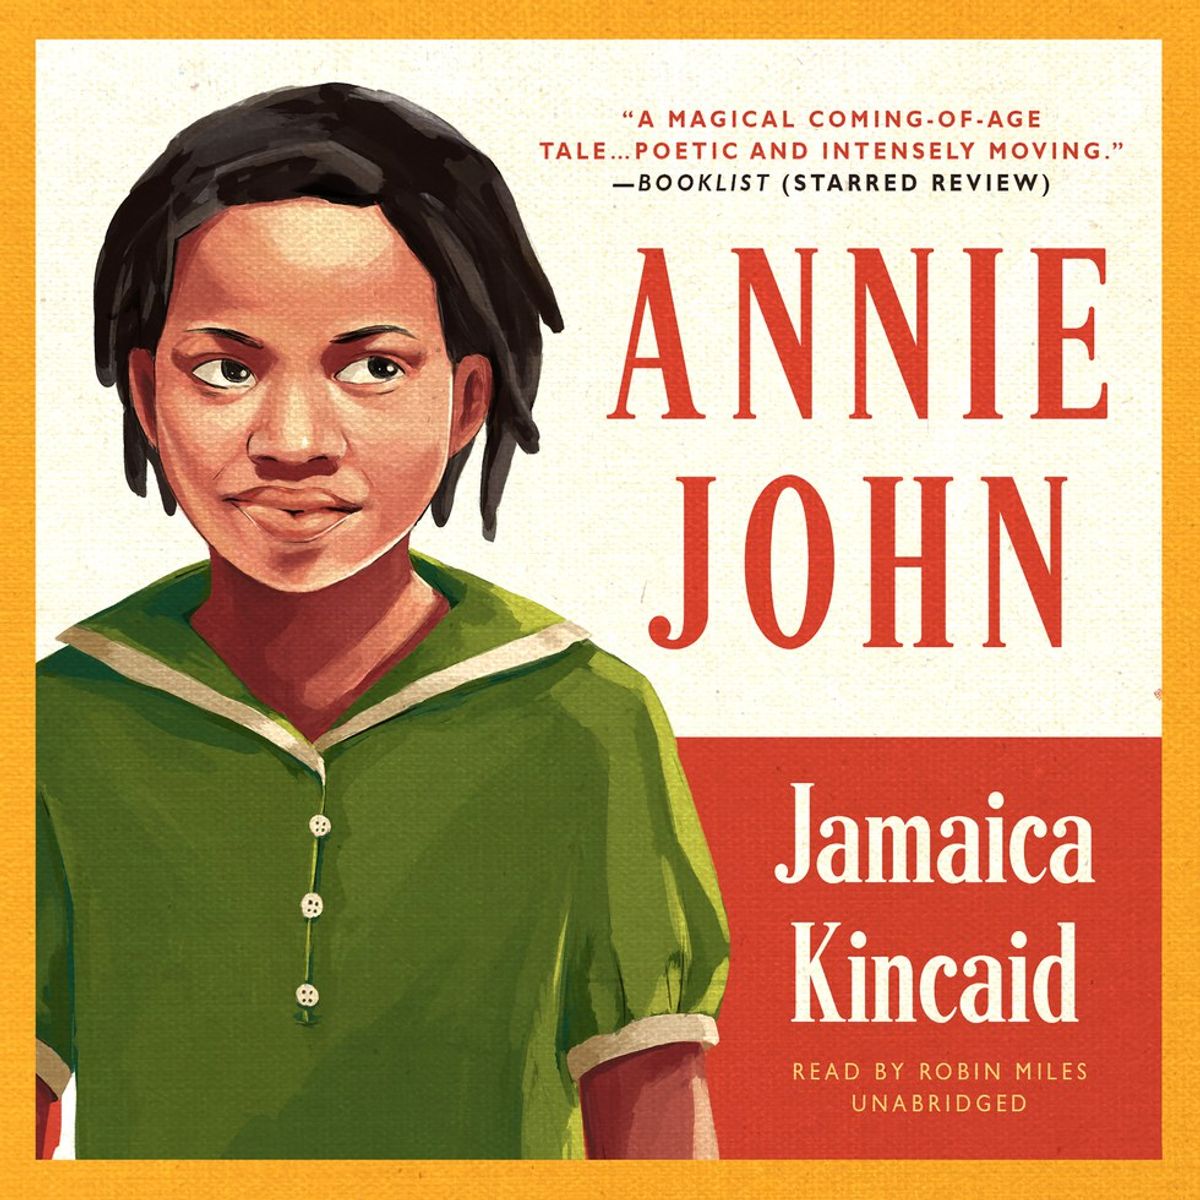 A Critical Analysis of "A Small Place" by Jamaica Kincaid